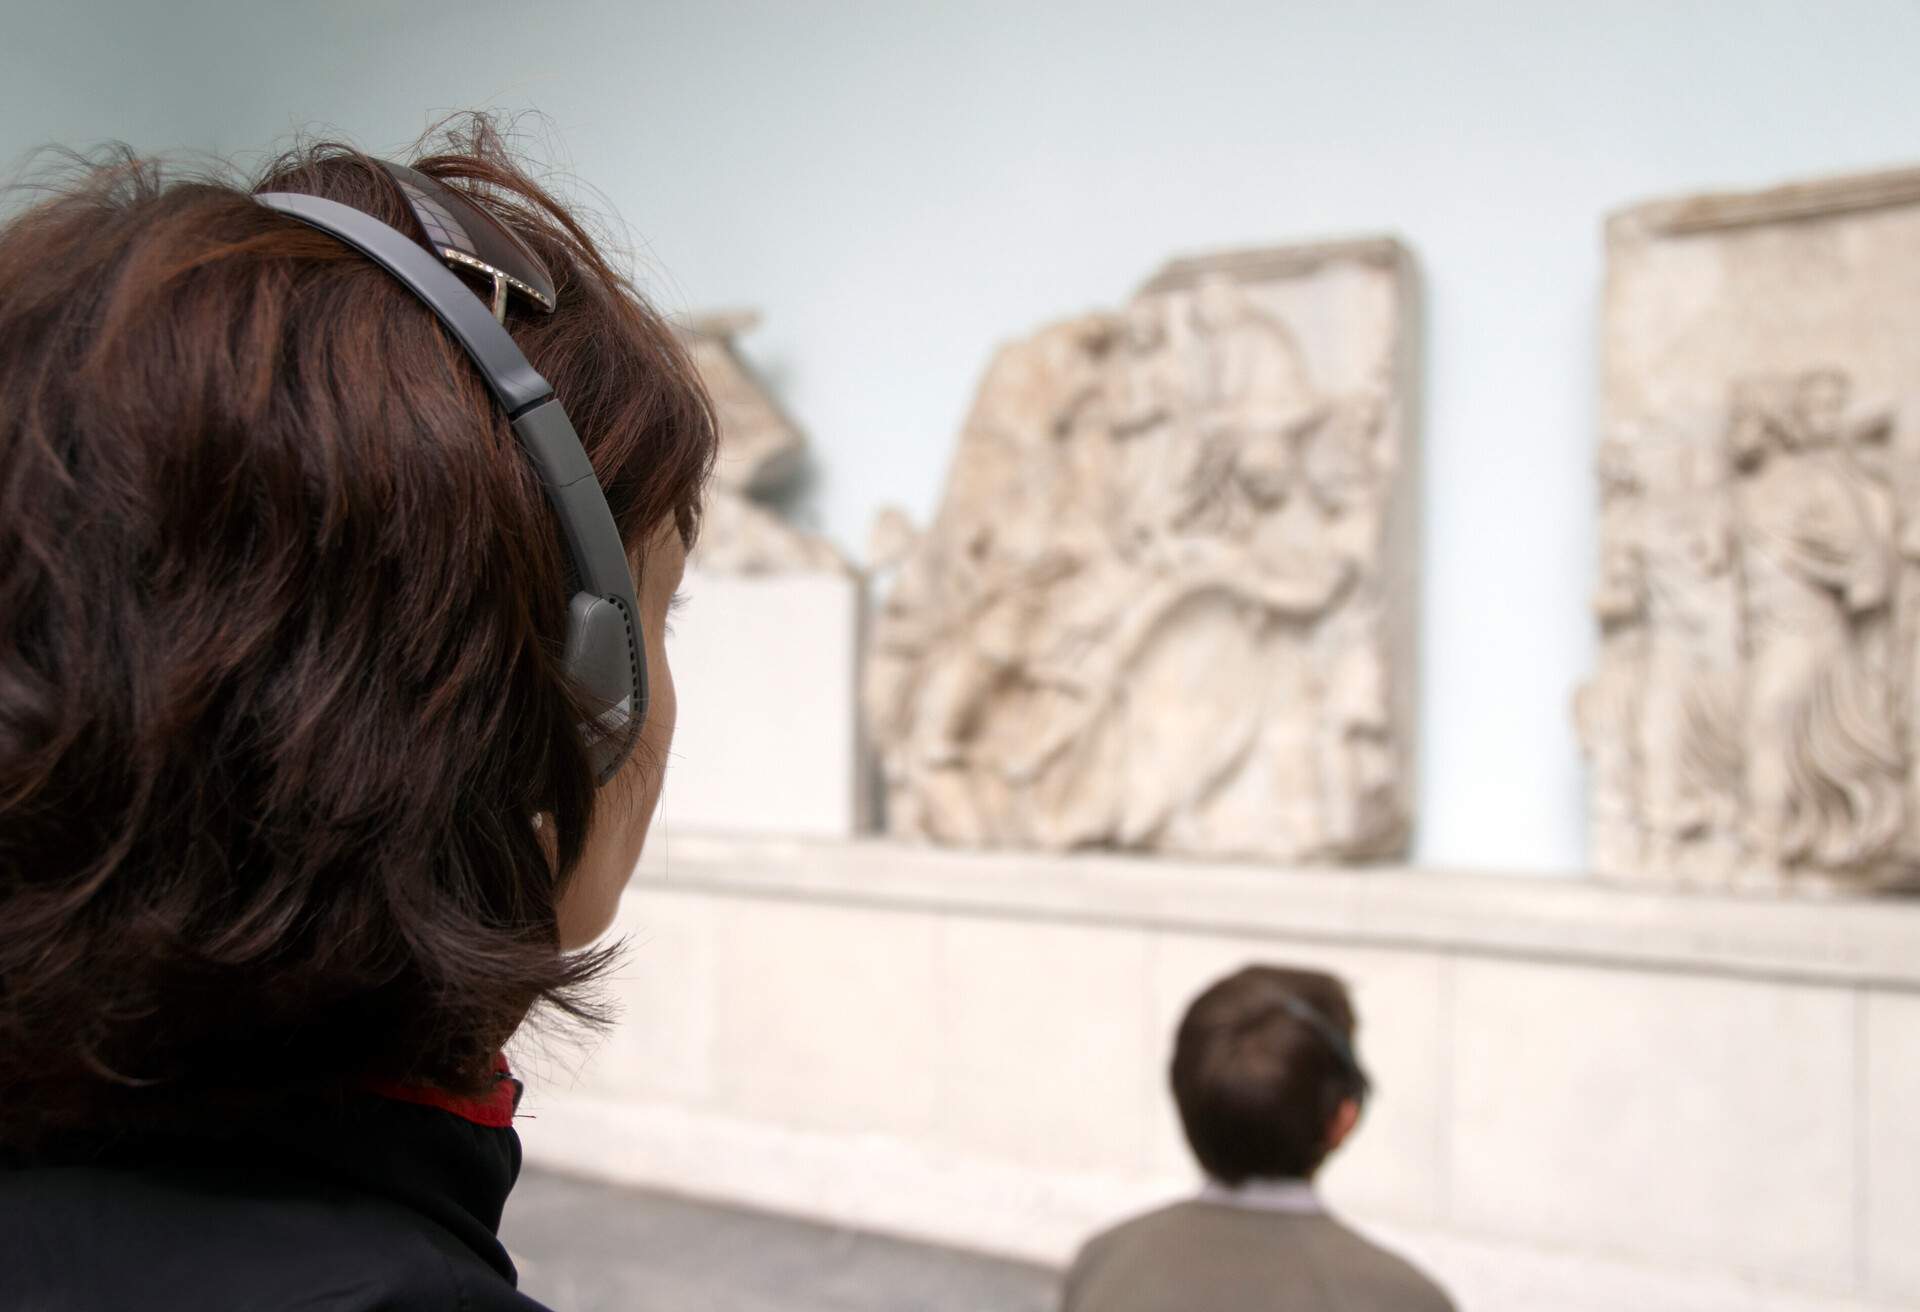 People wearing headphones are looking at stone carvings in a museum.